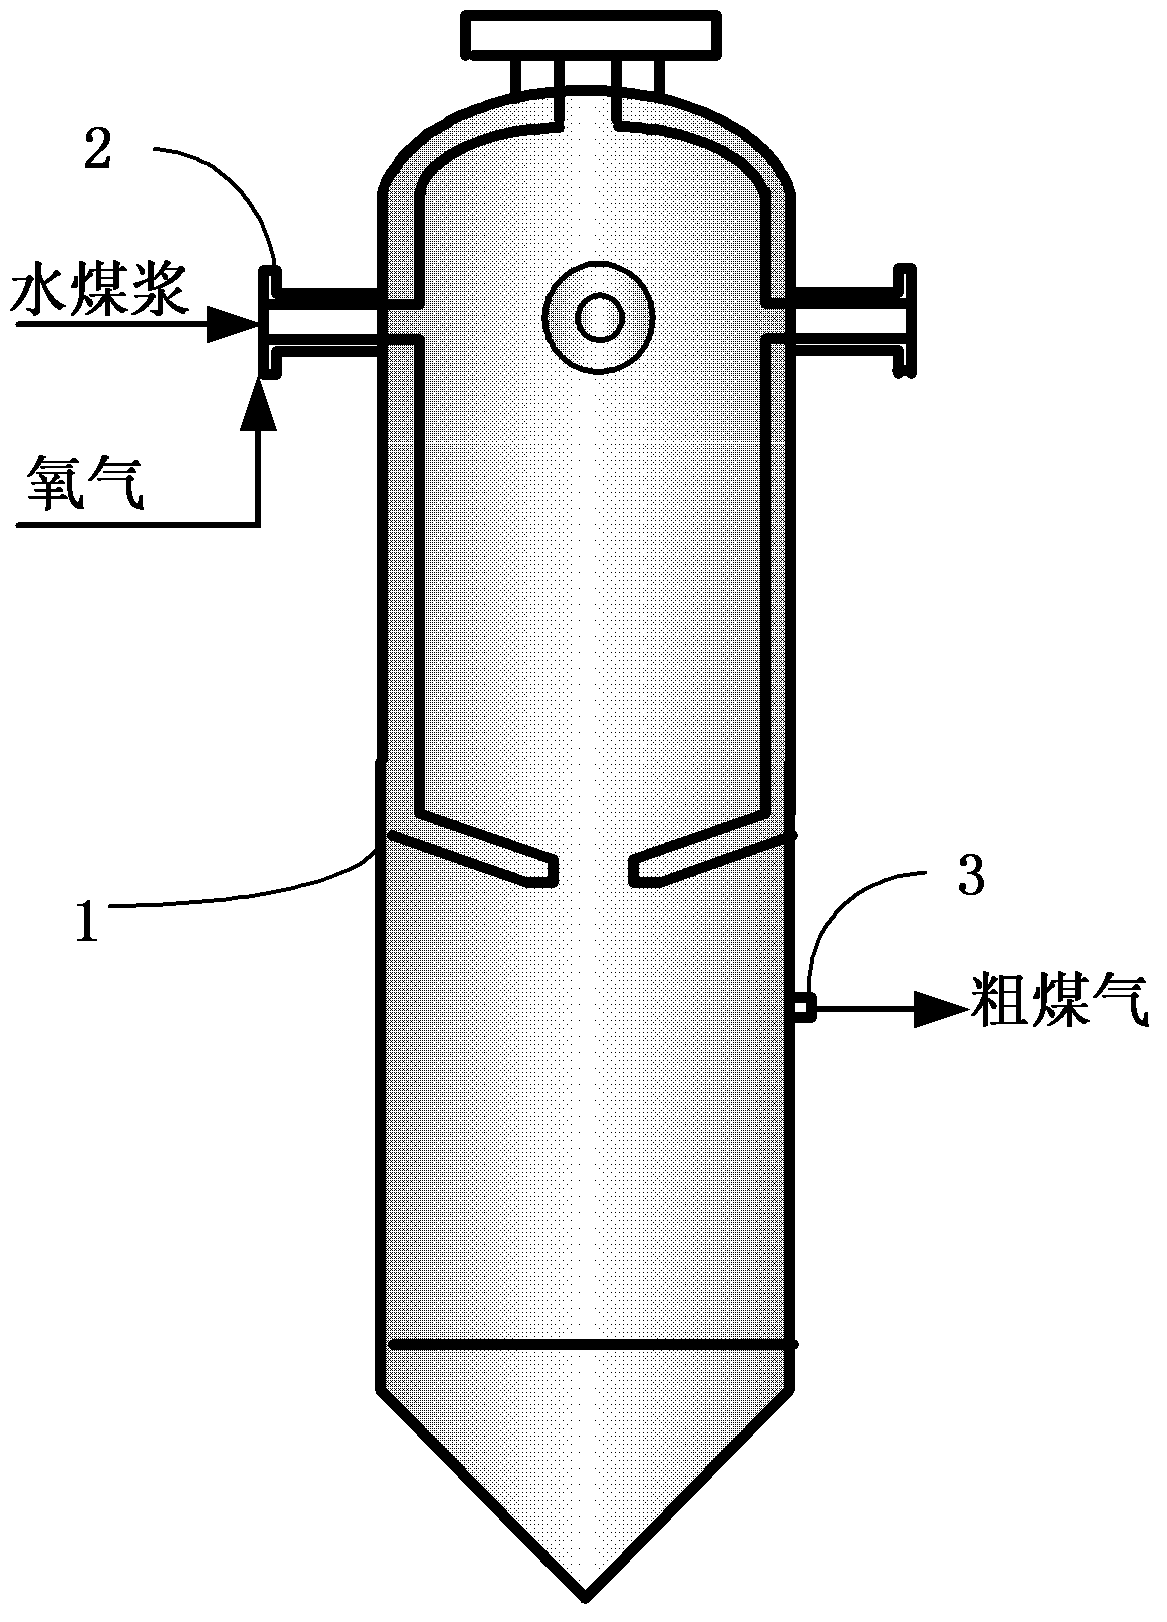 Control method for coal gasifier